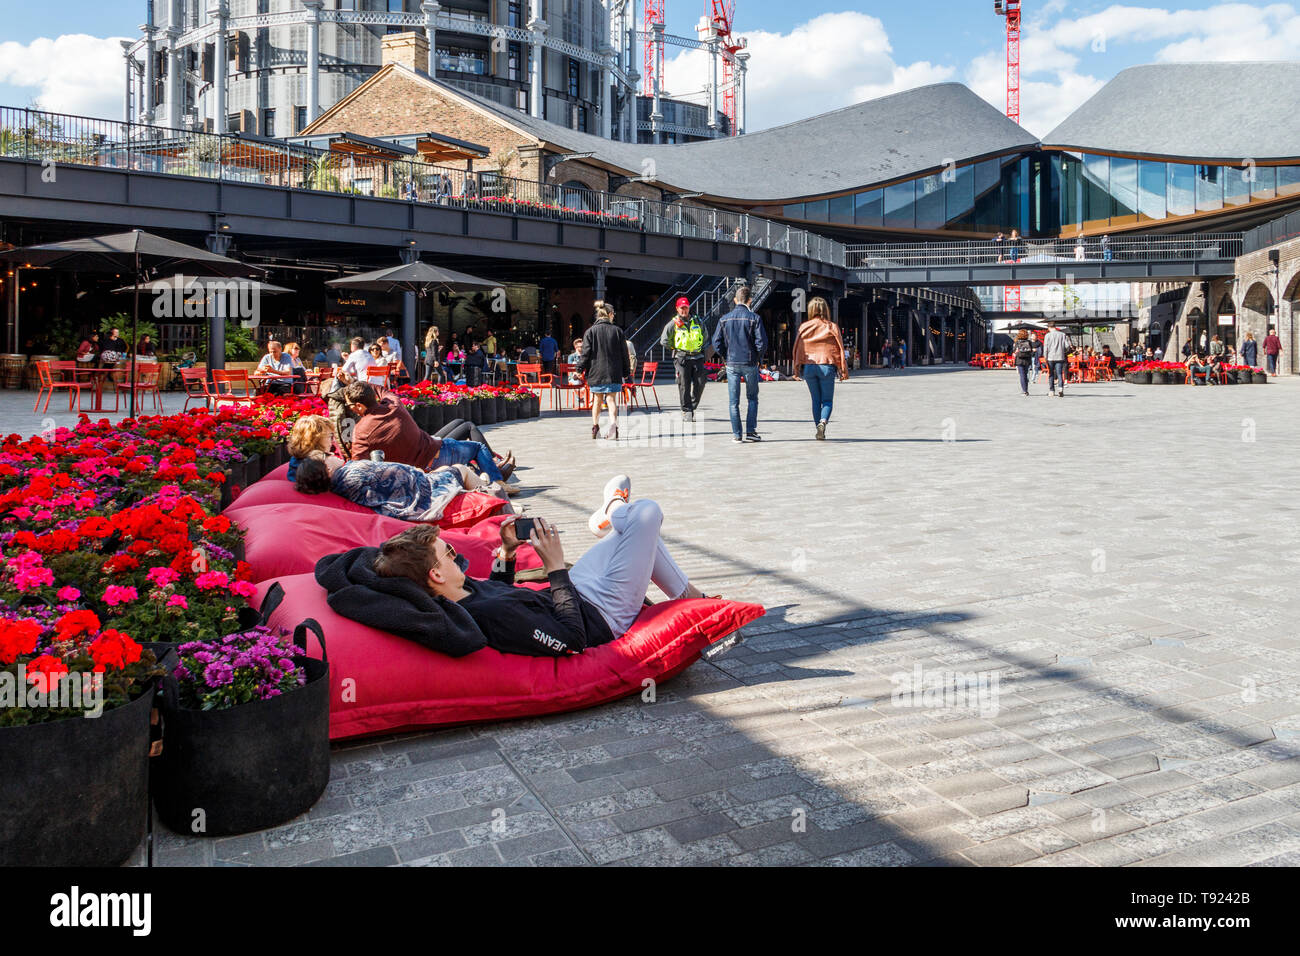 People lounging on red cushions by a bed of bright red flowers in the recently opened public space at Coal Drops Yard, King's Cross, London, UK, 2019 Stock Photo